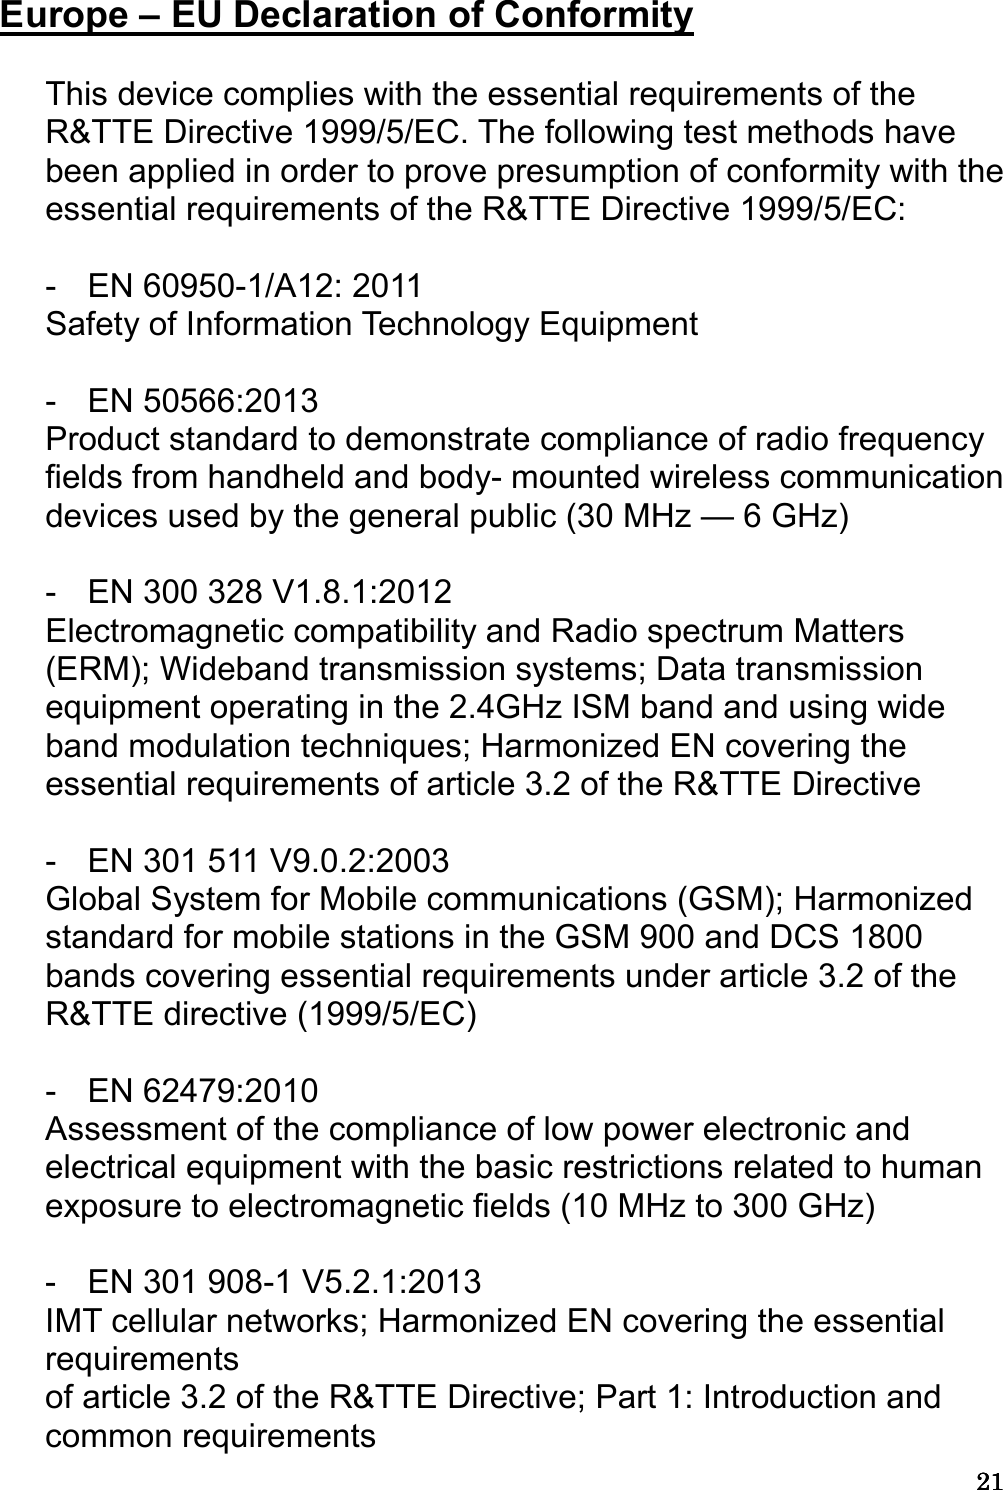 21212121  Europe – EU Declaration of Conformity  This device complies with the essential requirements of the R&amp;TTE Directive 1999/5/EC. The following test methods have been applied in order to prove presumption of conformity with the essential requirements of the R&amp;TTE Directive 1999/5/EC:  -  EN 60950-1/A12: 2011 Safety of Information Technology Equipment  -  EN 50566:2013 Product standard to demonstrate compliance of radio frequency fields from handheld and body- mounted wireless communication devices used by the general public (30 MHz — 6 GHz)  -  EN 300 328 V1.8.1:2012 Electromagnetic compatibility and Radio spectrum Matters (ERM); Wideband transmission systems; Data transmission equipment operating in the 2.4GHz ISM band and using wide band modulation techniques; Harmonized EN covering the essential requirements of article 3.2 of the R&amp;TTE Directive  -  EN 301 511 V9.0.2:2003   Global System for Mobile communications (GSM); Harmonized standard for mobile stations in the GSM 900 and DCS 1800 bands covering essential requirements under article 3.2 of the R&amp;TTE directive (1999/5/EC)  -  EN 62479:2010 Assessment of the compliance of low power electronic and electrical equipment with the basic restrictions related to human exposure to electromagnetic fields (10 MHz to 300 GHz)  -  EN 301 908-1 V5.2.1:2013 IMT cellular networks; Harmonized EN covering the essential requirements of article 3.2 of the R&amp;TTE Directive; Part 1: Introduction and common requirements 